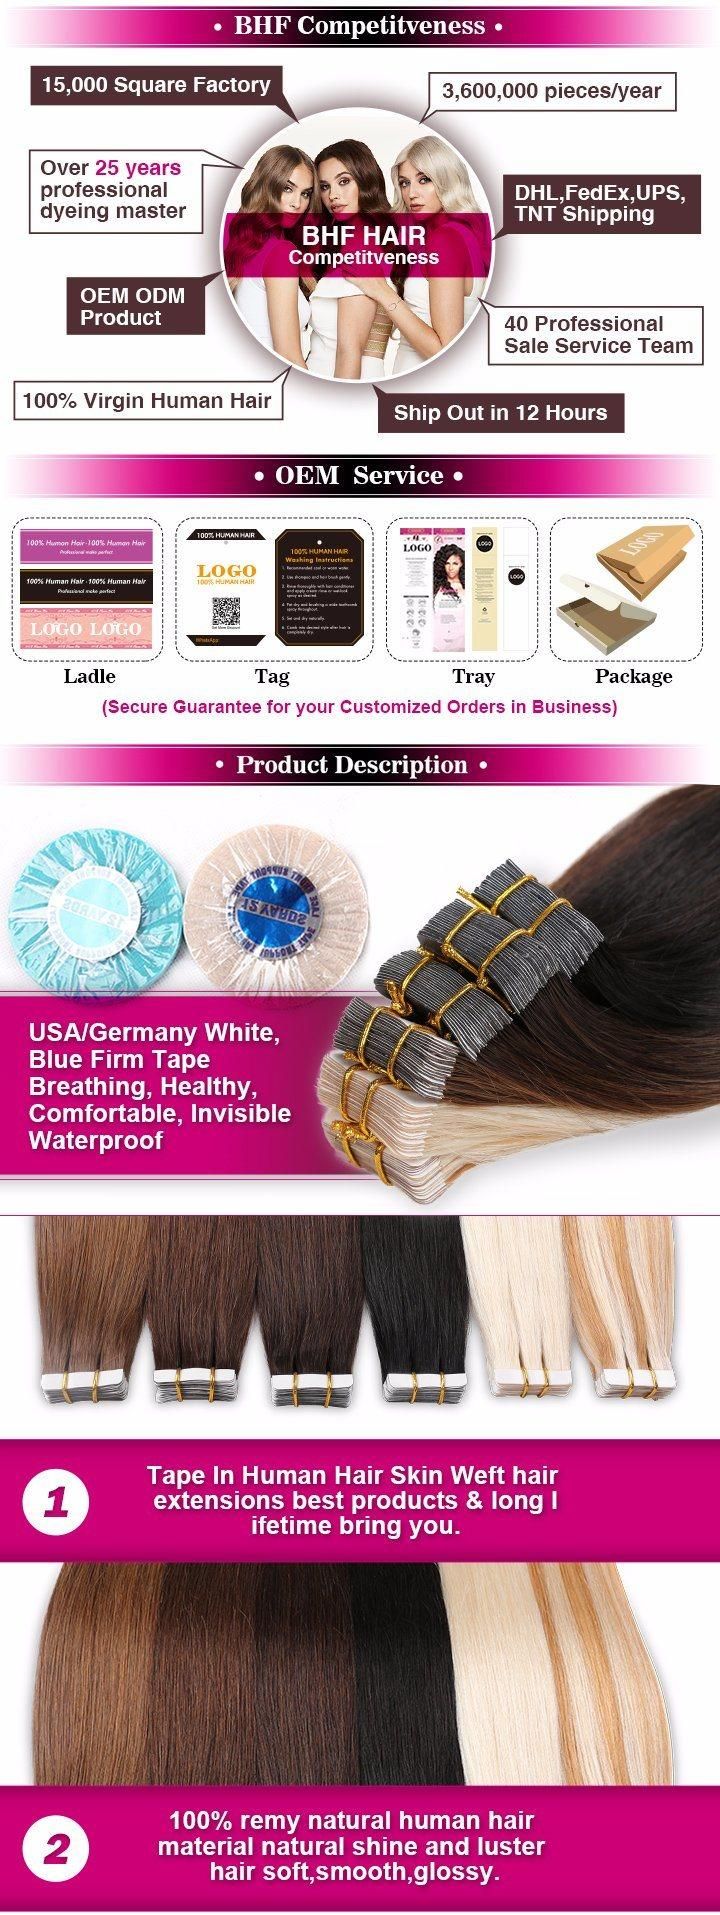 Wholesale Cheap Top Quality 100% Peruvian Virgin Remy Human Hair Extension Body Wave Natural Hair Weft Extension Weaves Black (BHF-LBB1240)